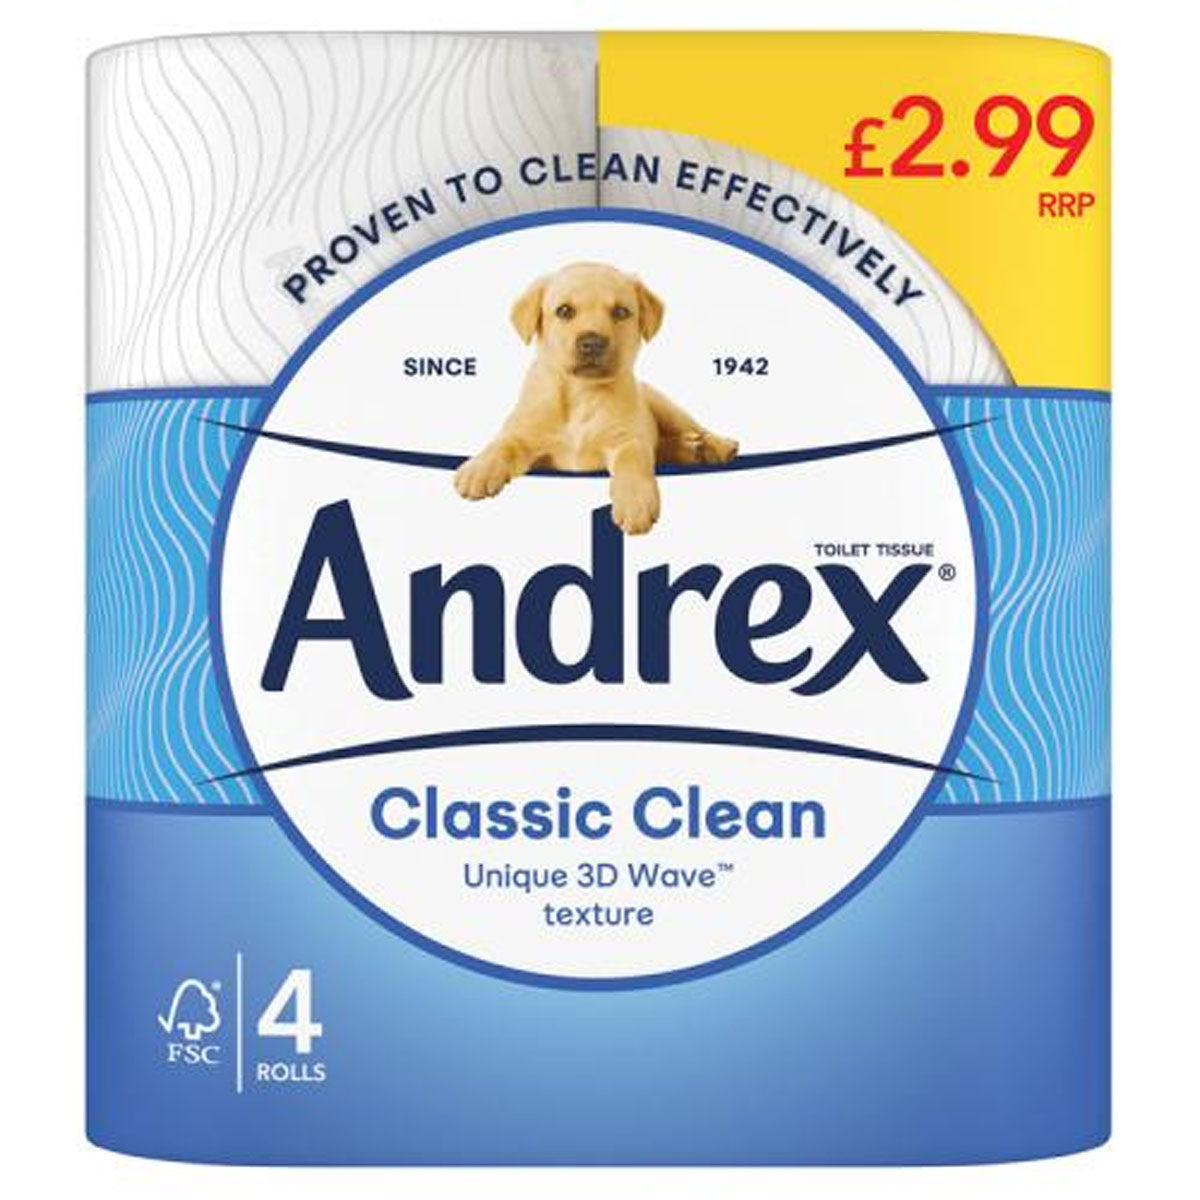 Andrex - Classic Clean Toilet Tissue - 4 Rolls - Continental Food Store